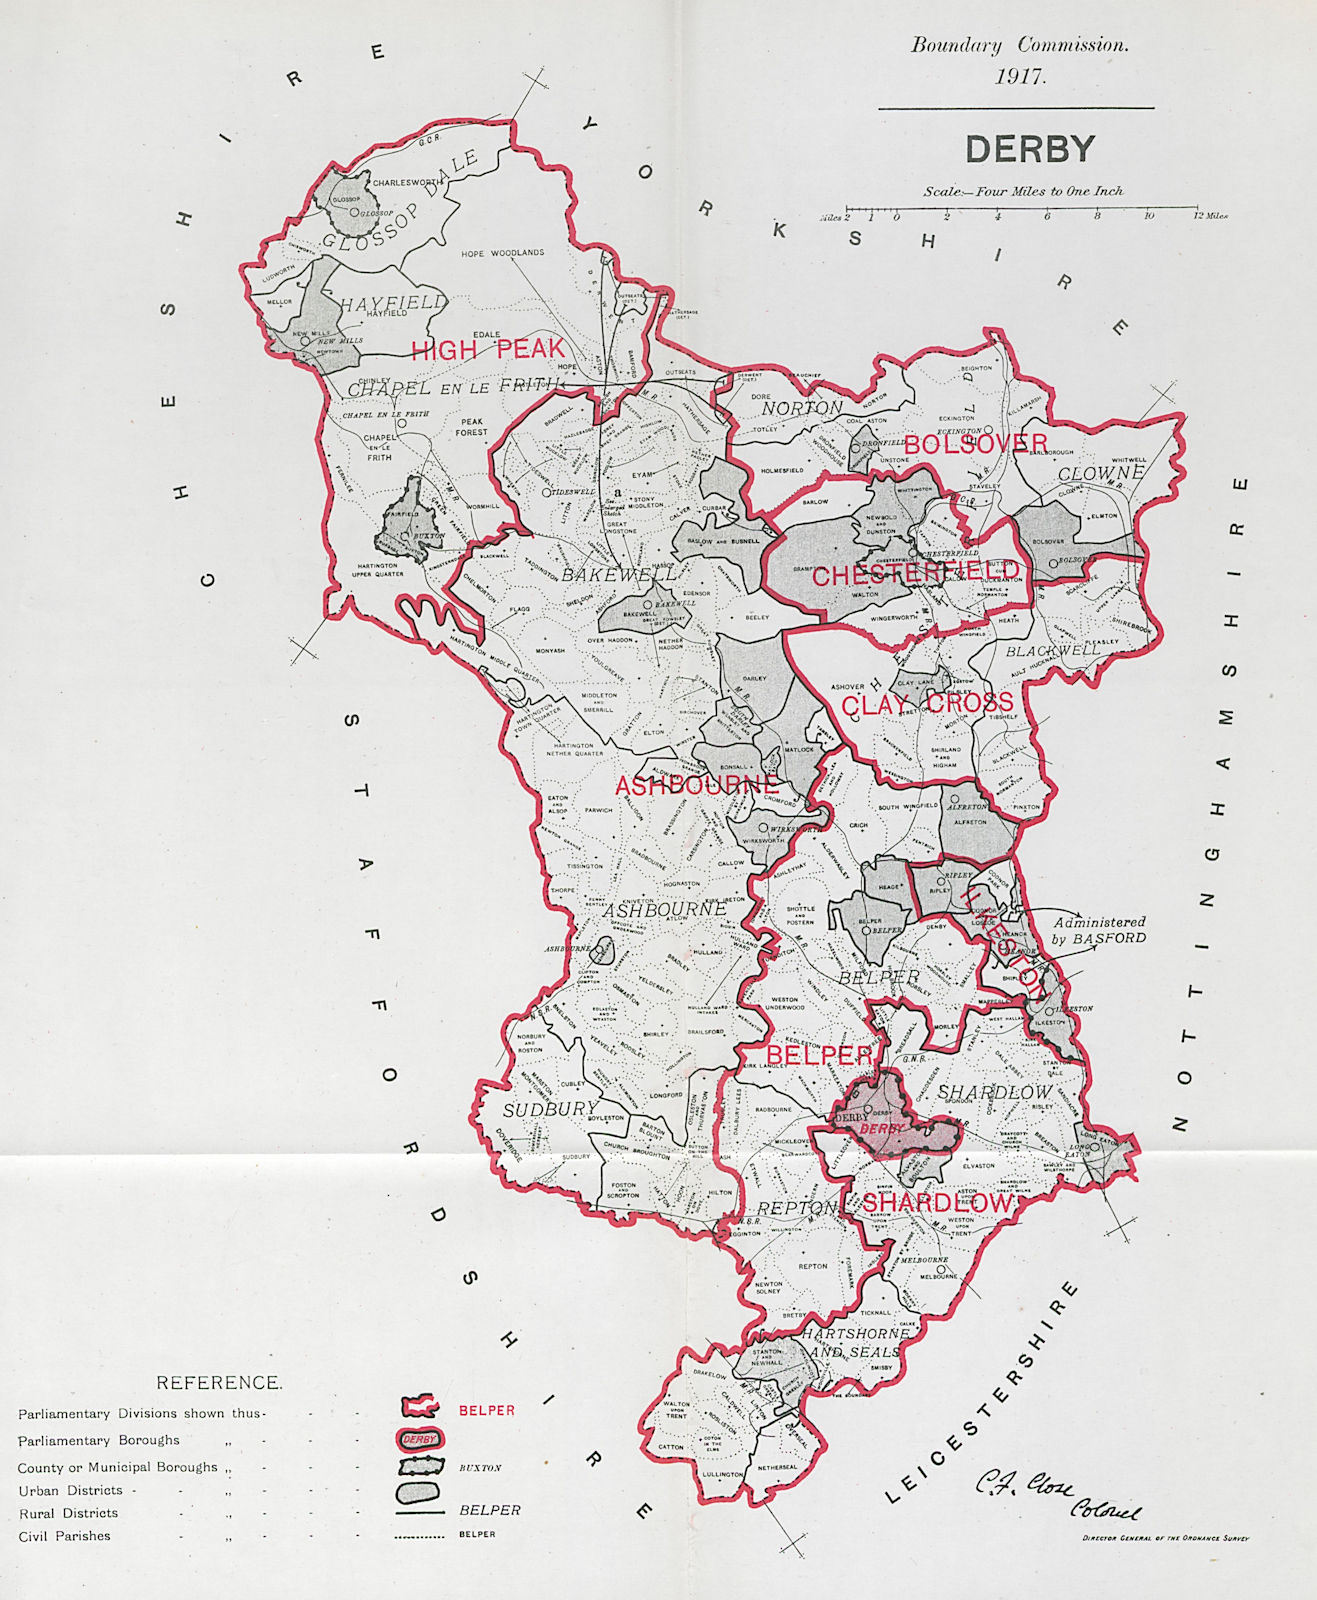 Derby Parliamentary County. Derbyshire. BOUNDARY COMMISSION. Close 1917 map